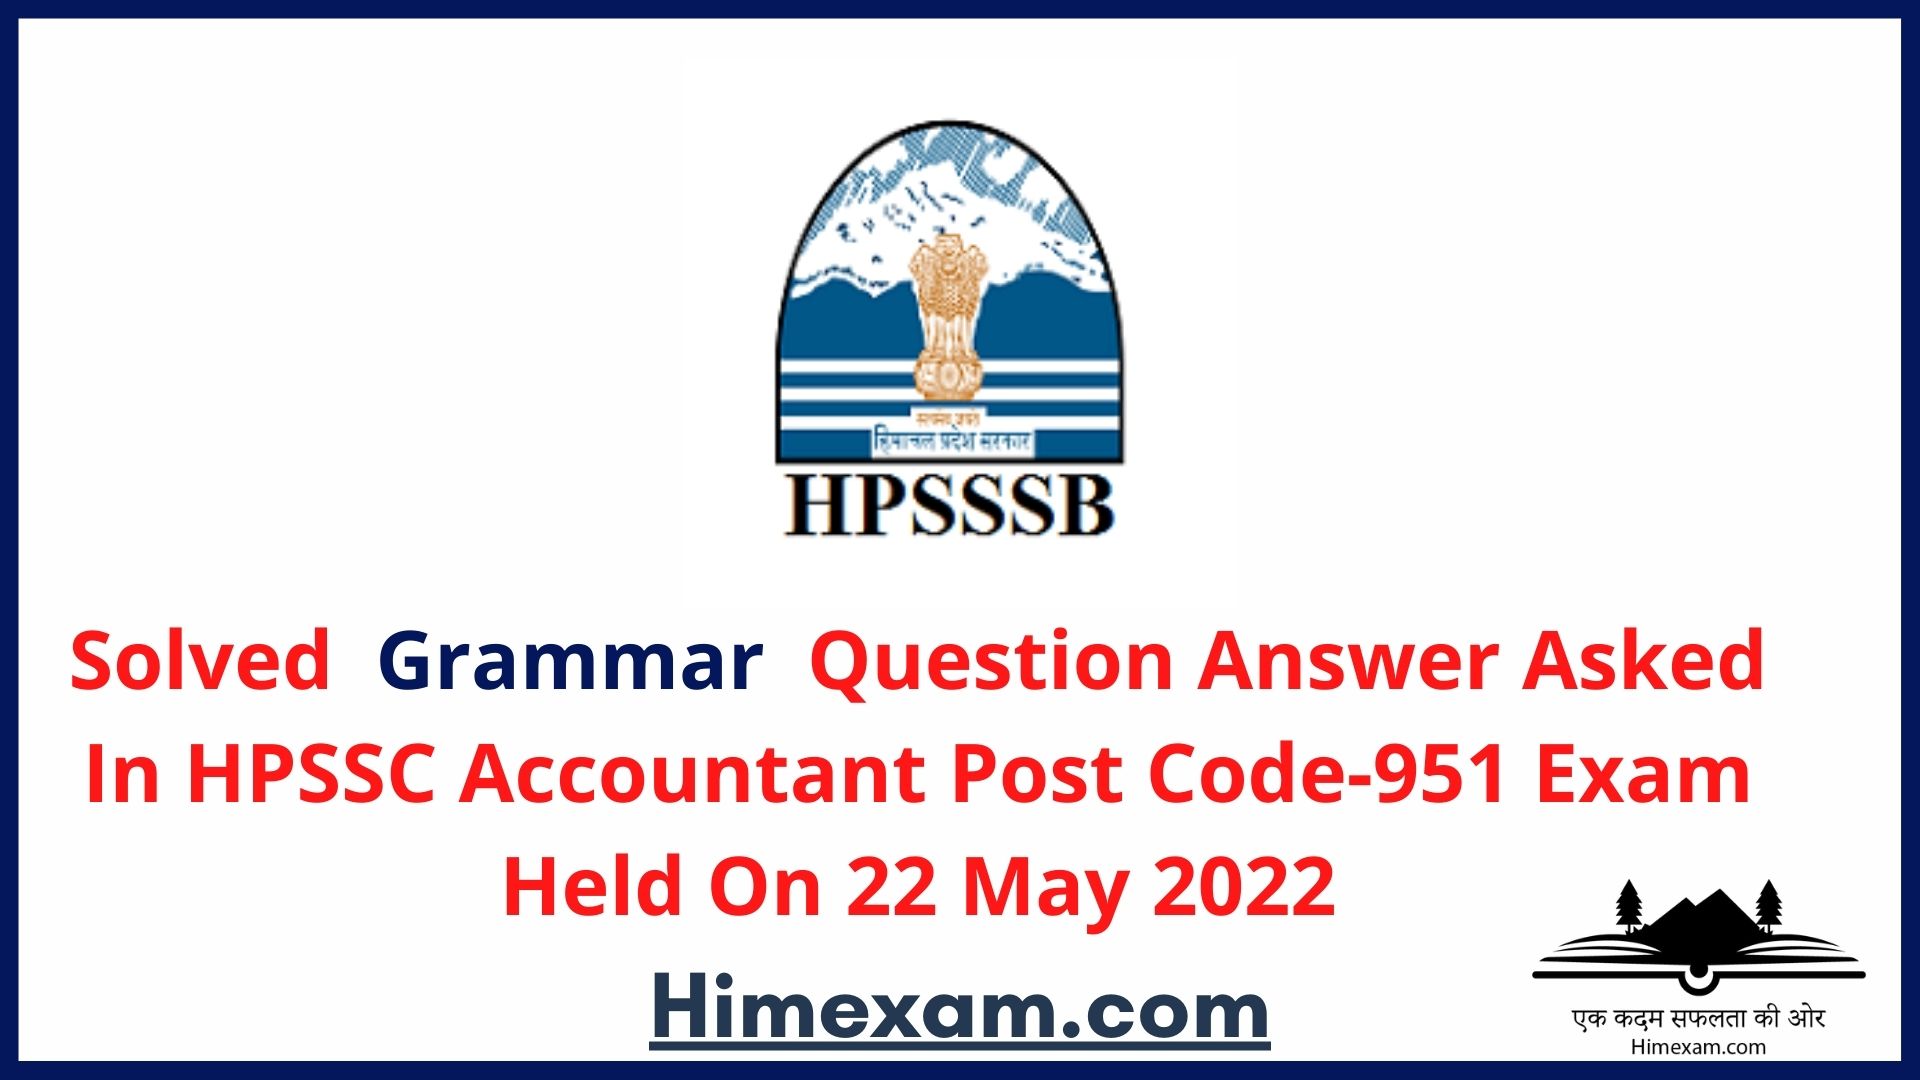 Solved Grammar Question Asked In Accountant Post Code-951 Exam  2022